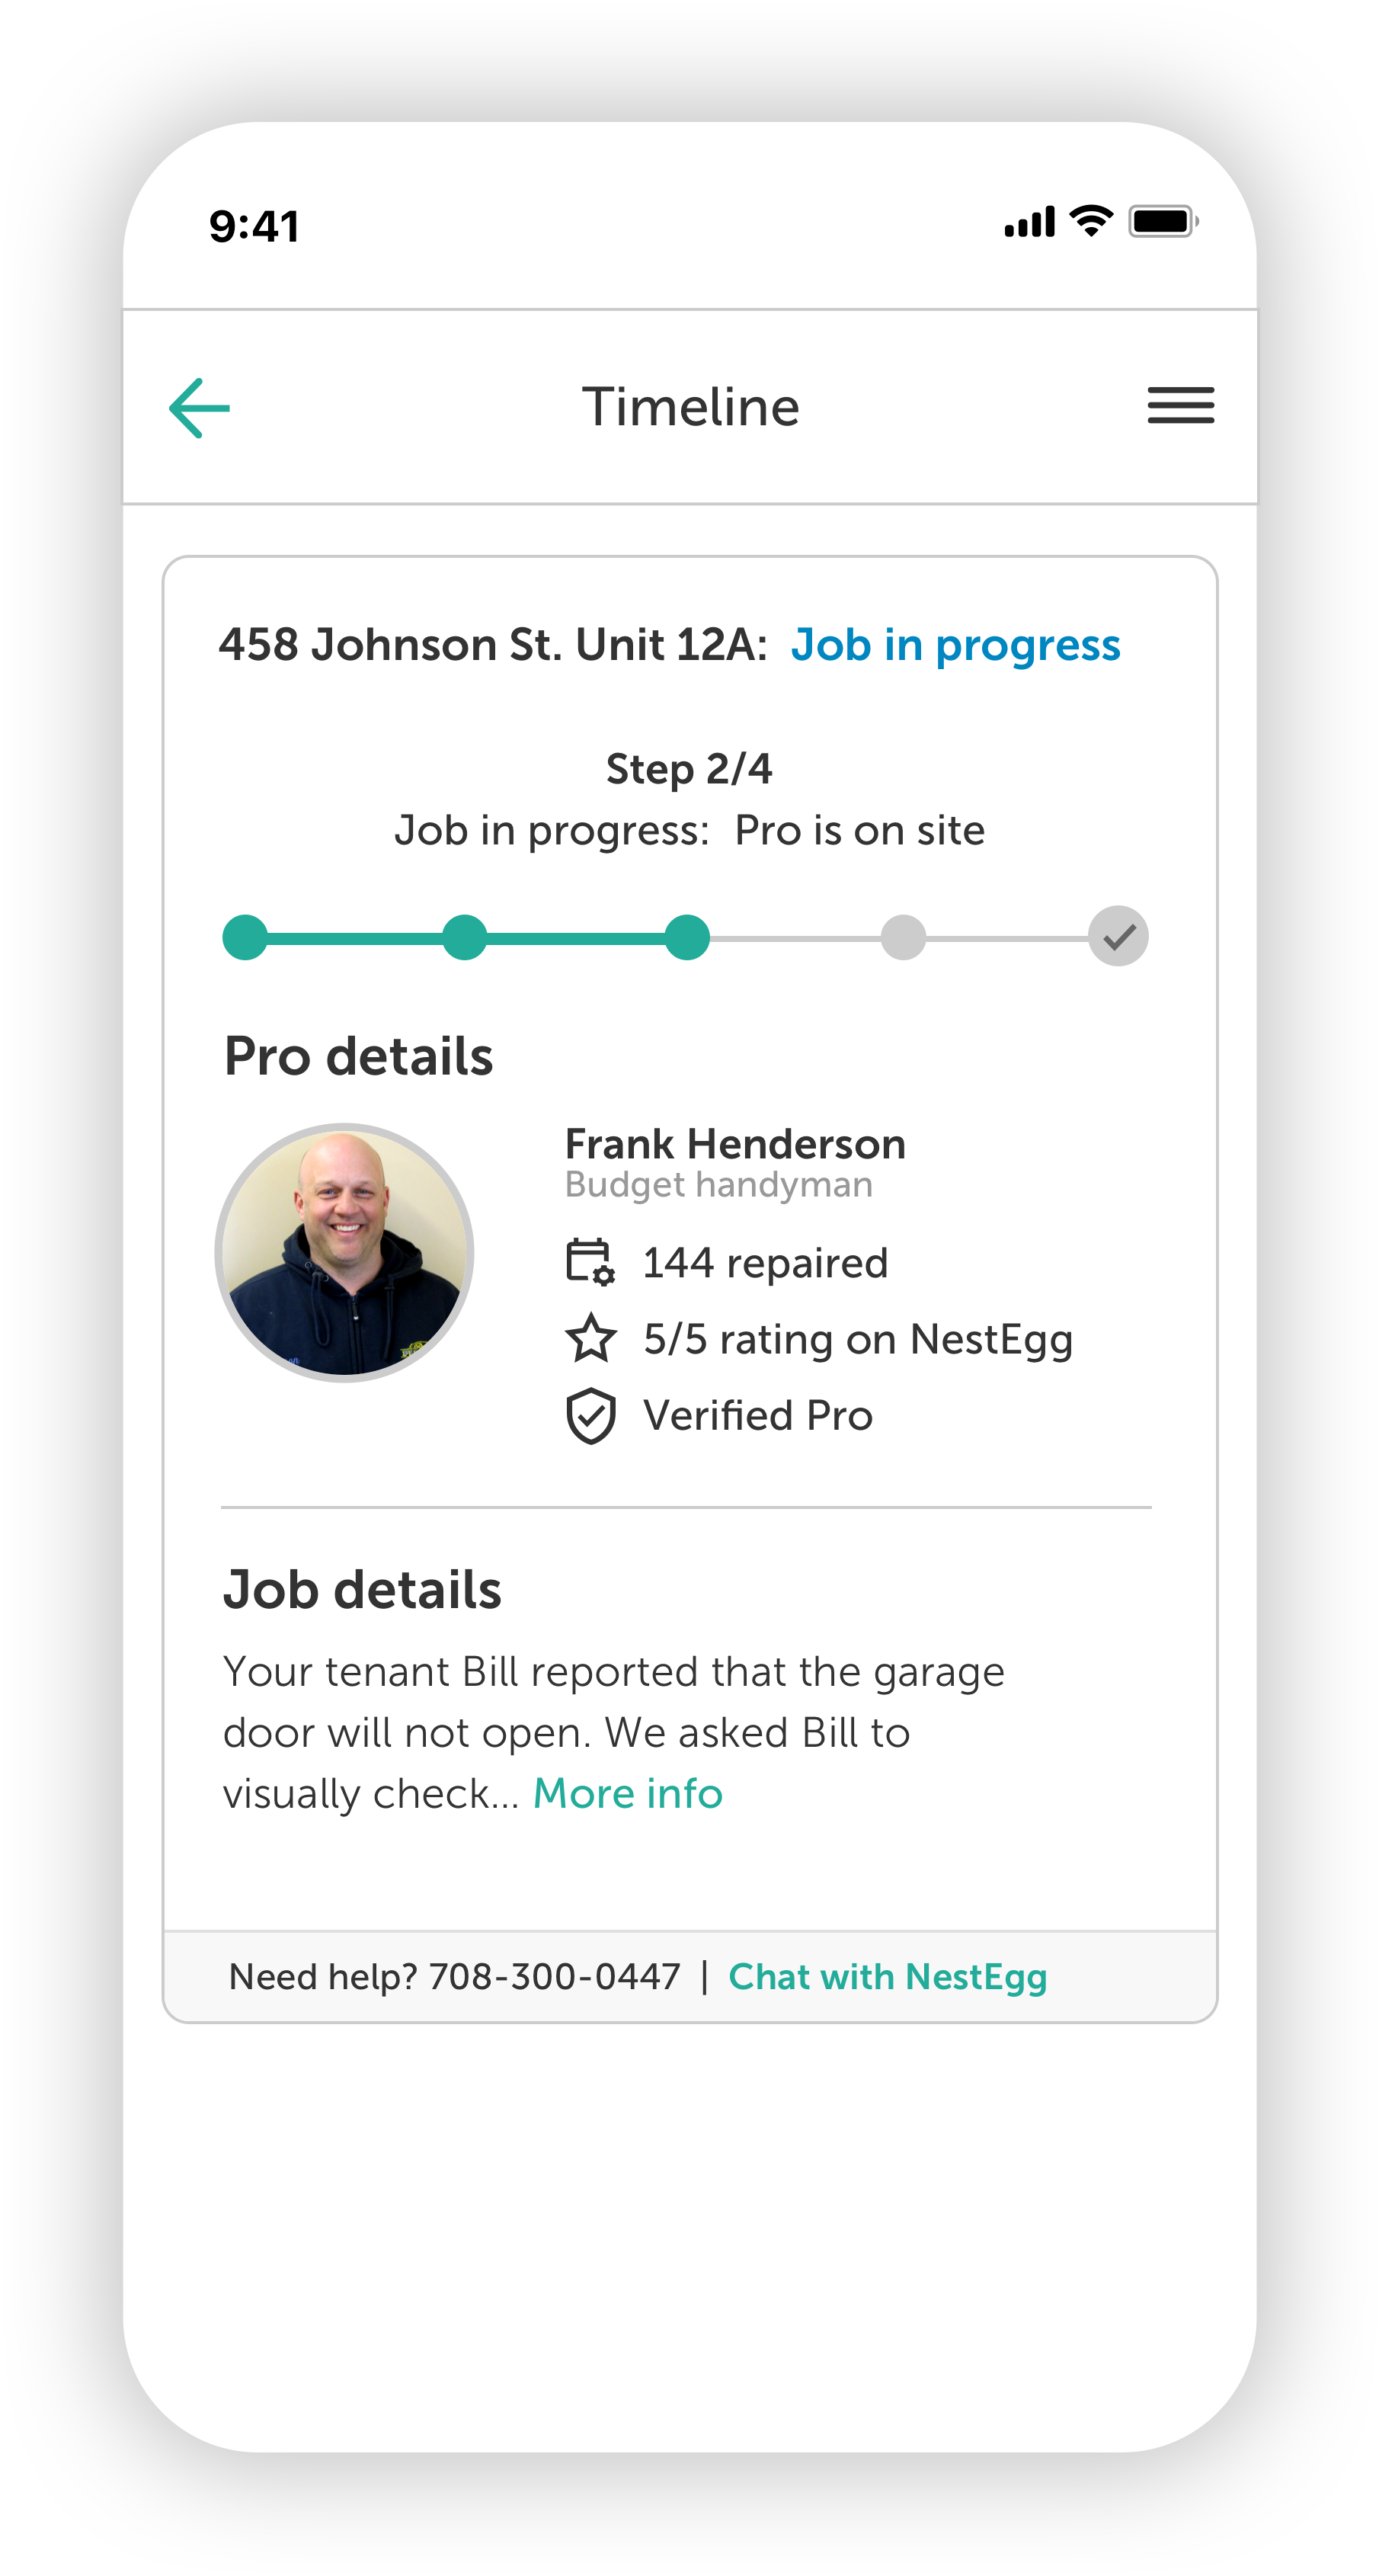 Once ordered, track the status of your maintenance job in the Timeline section